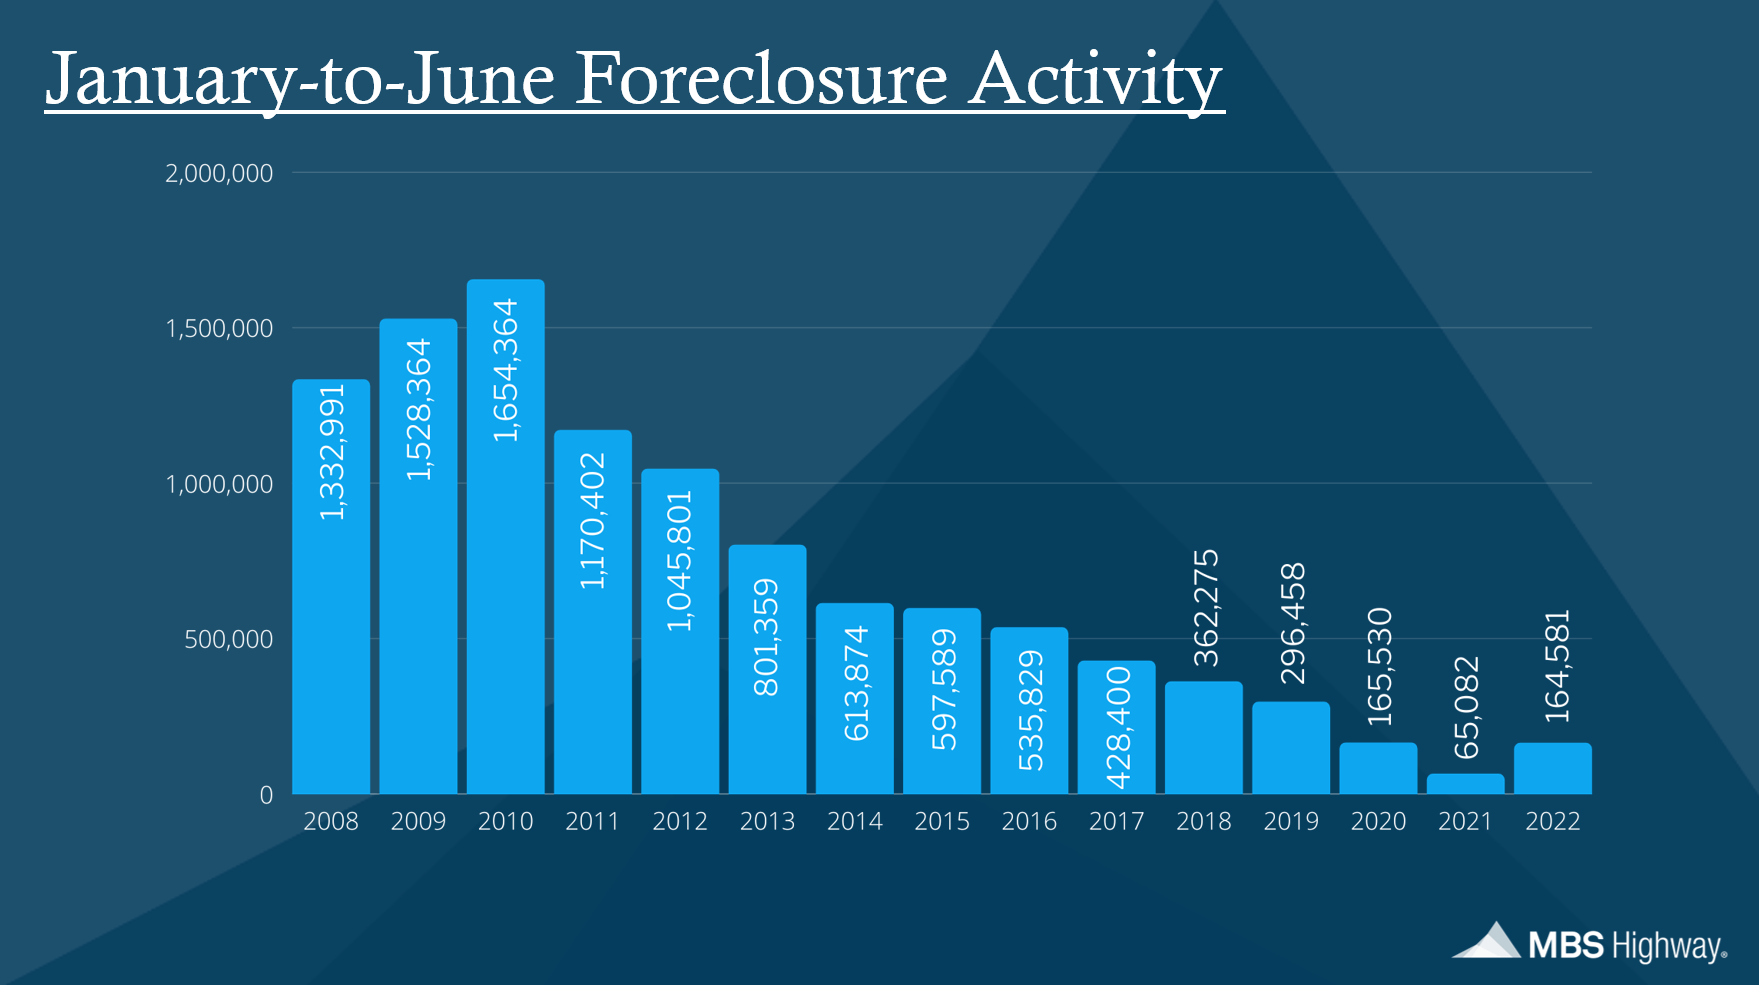 MBS Highway graph of Foreclosure numbers by year from 2008 to 2022 for the first 6 months of the year